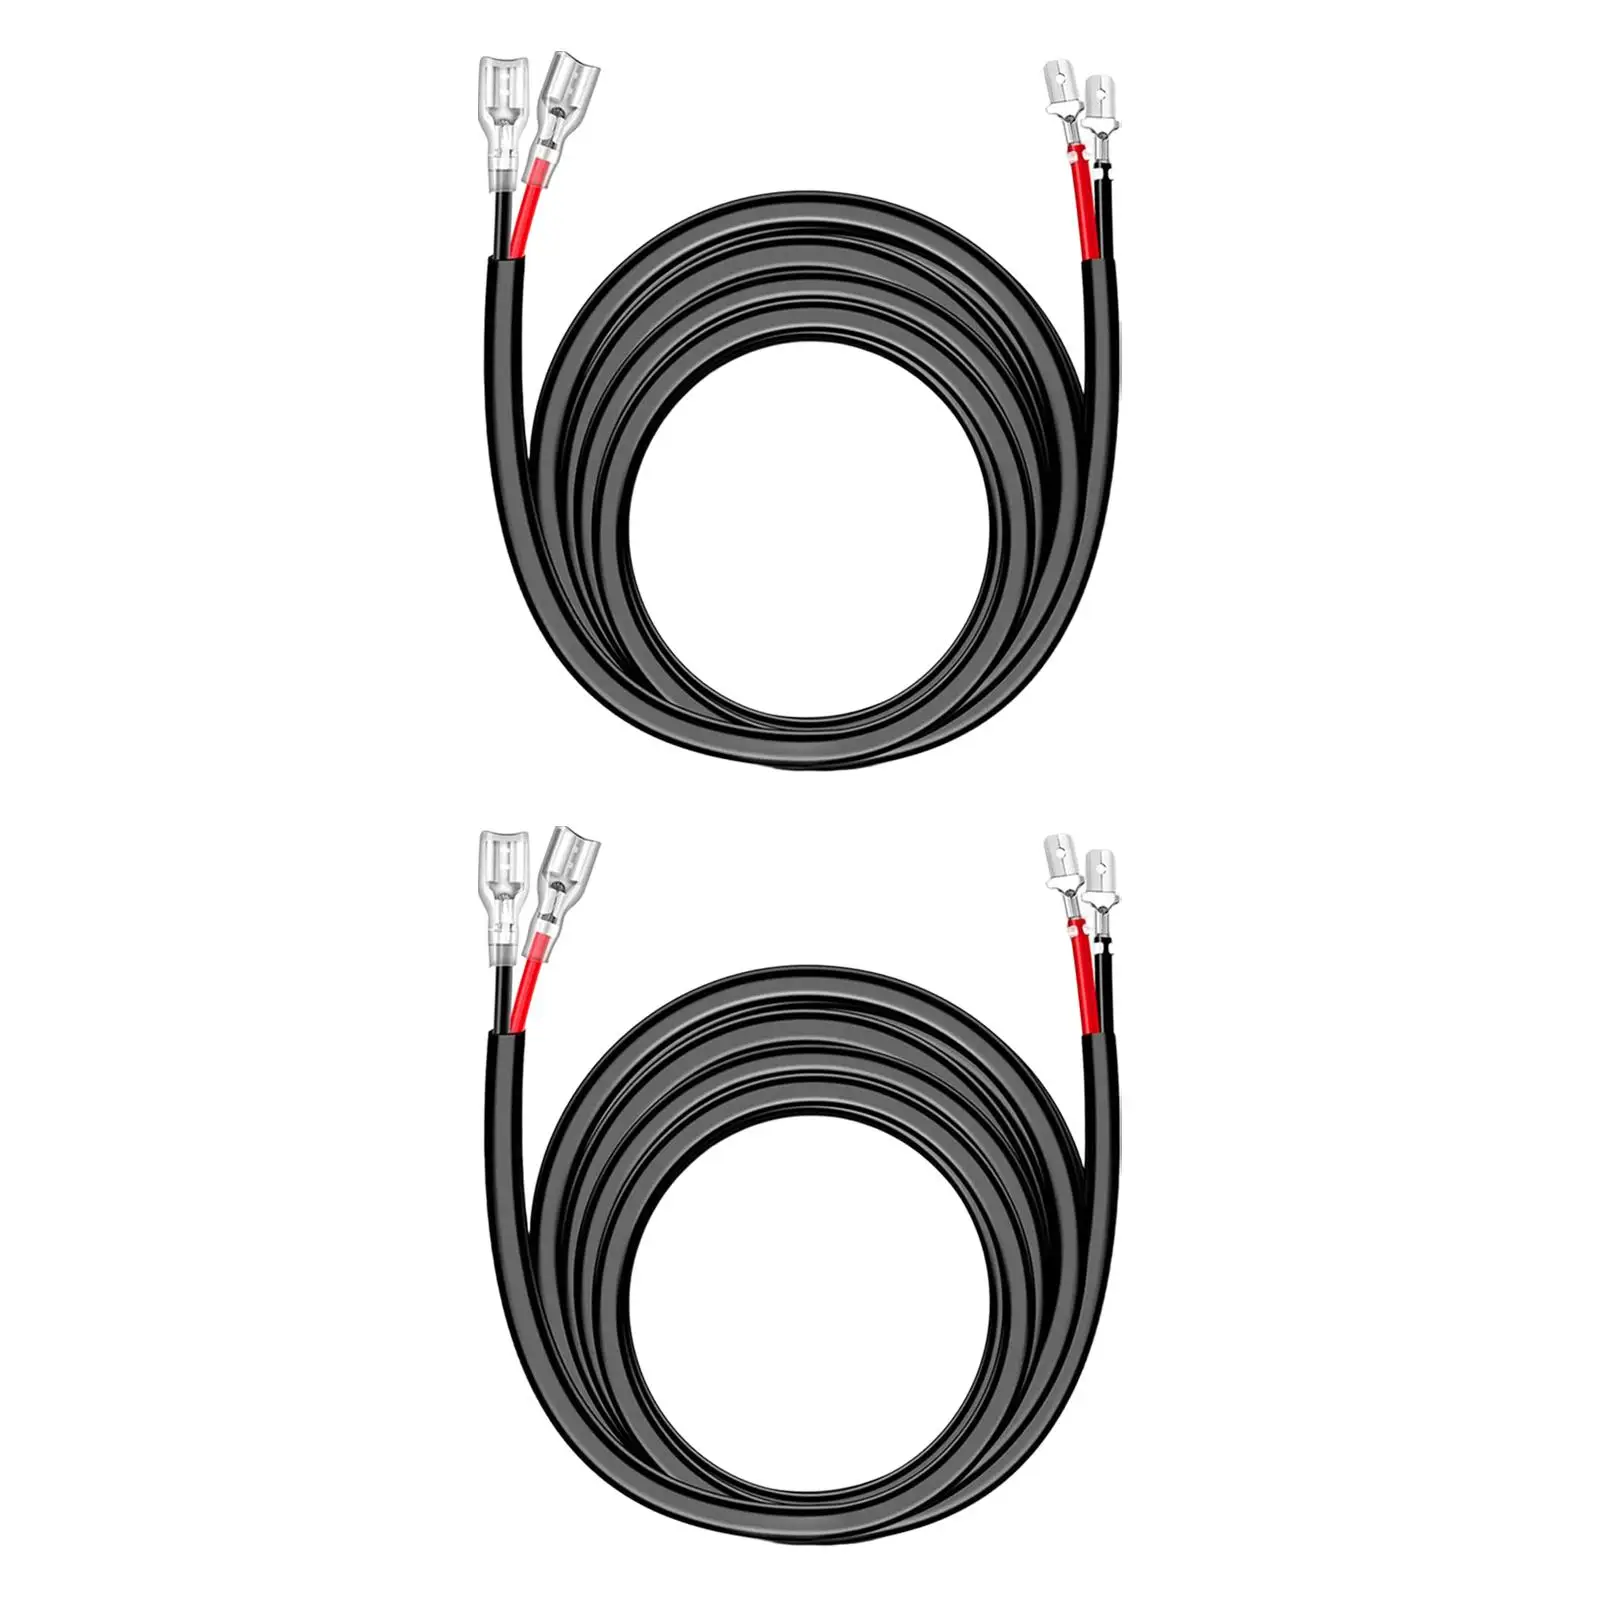 2Pcs 16 Gauge Extension Wiring Harness Waterproof 10ft for Truck Driving Fog